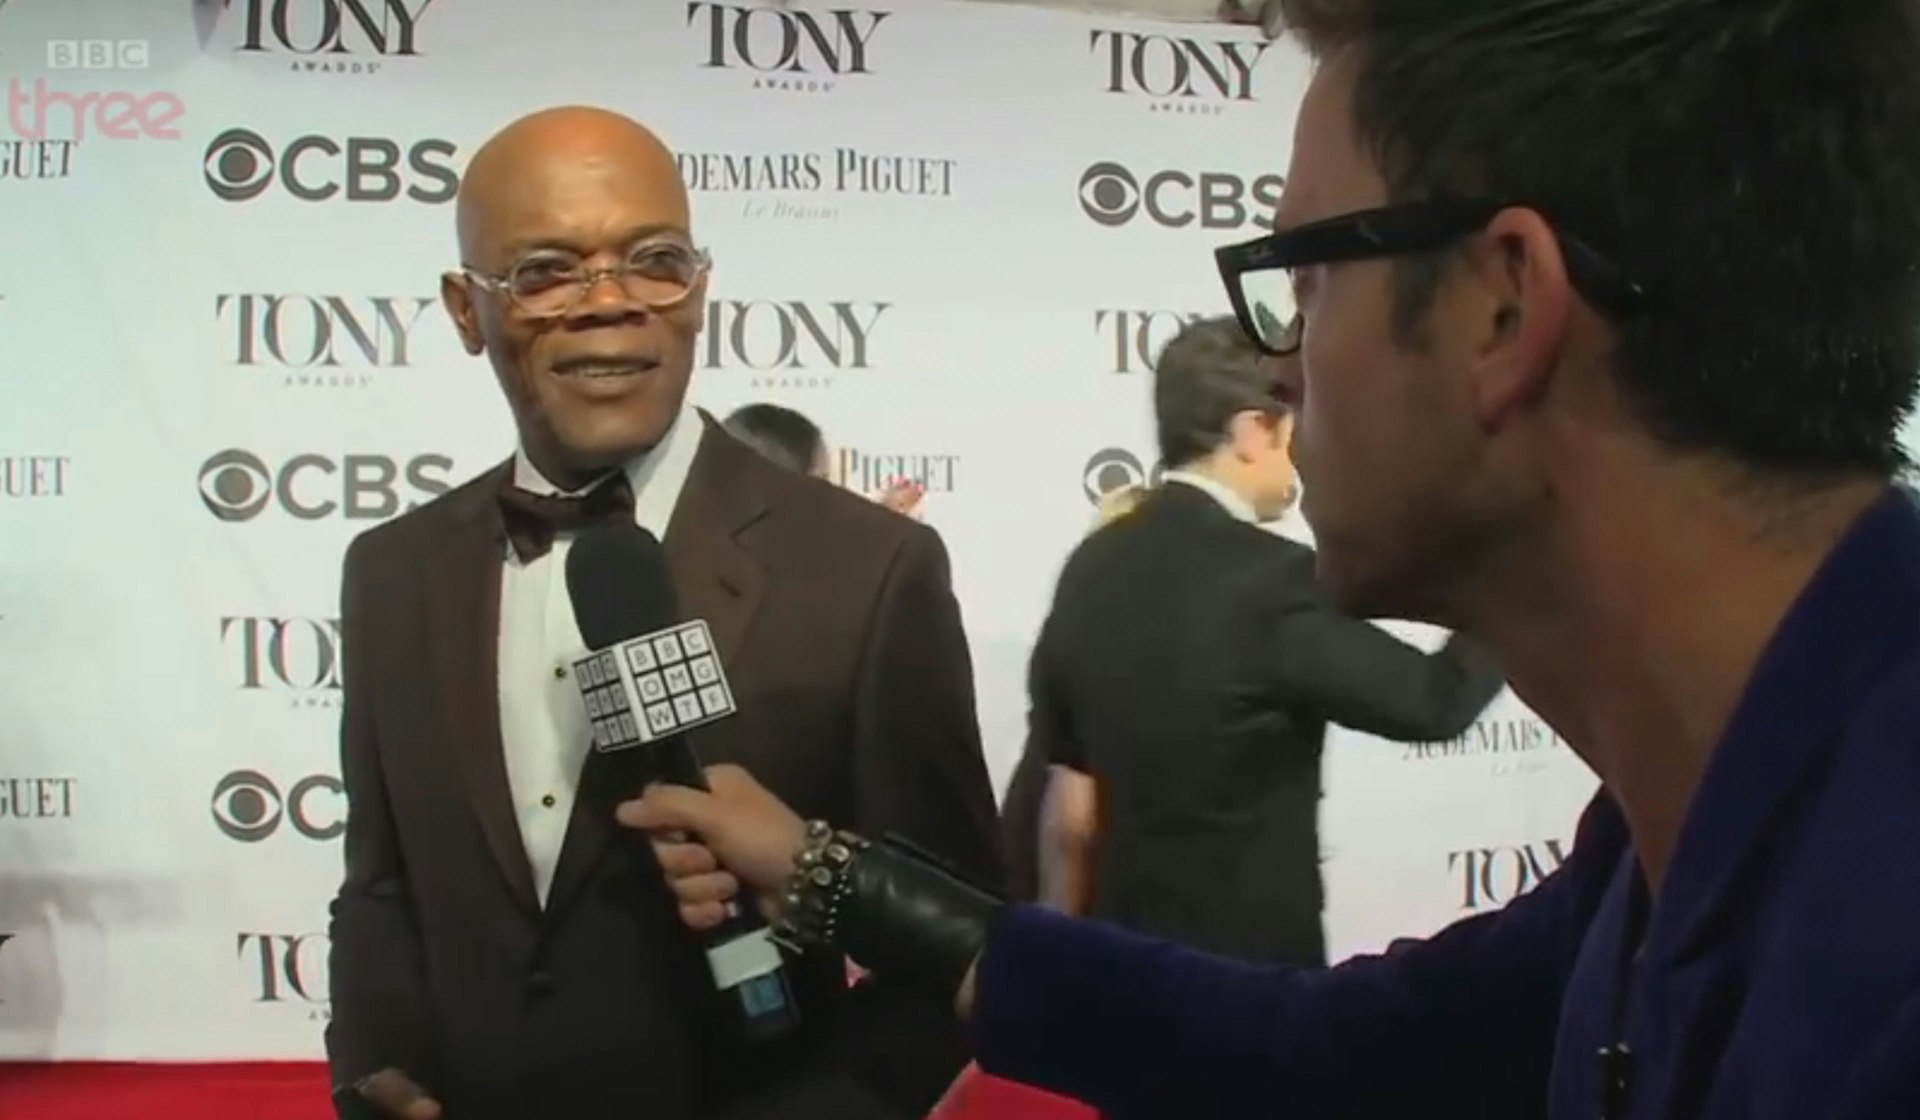 What is Samuel L Jackson’s policy on North Korea?